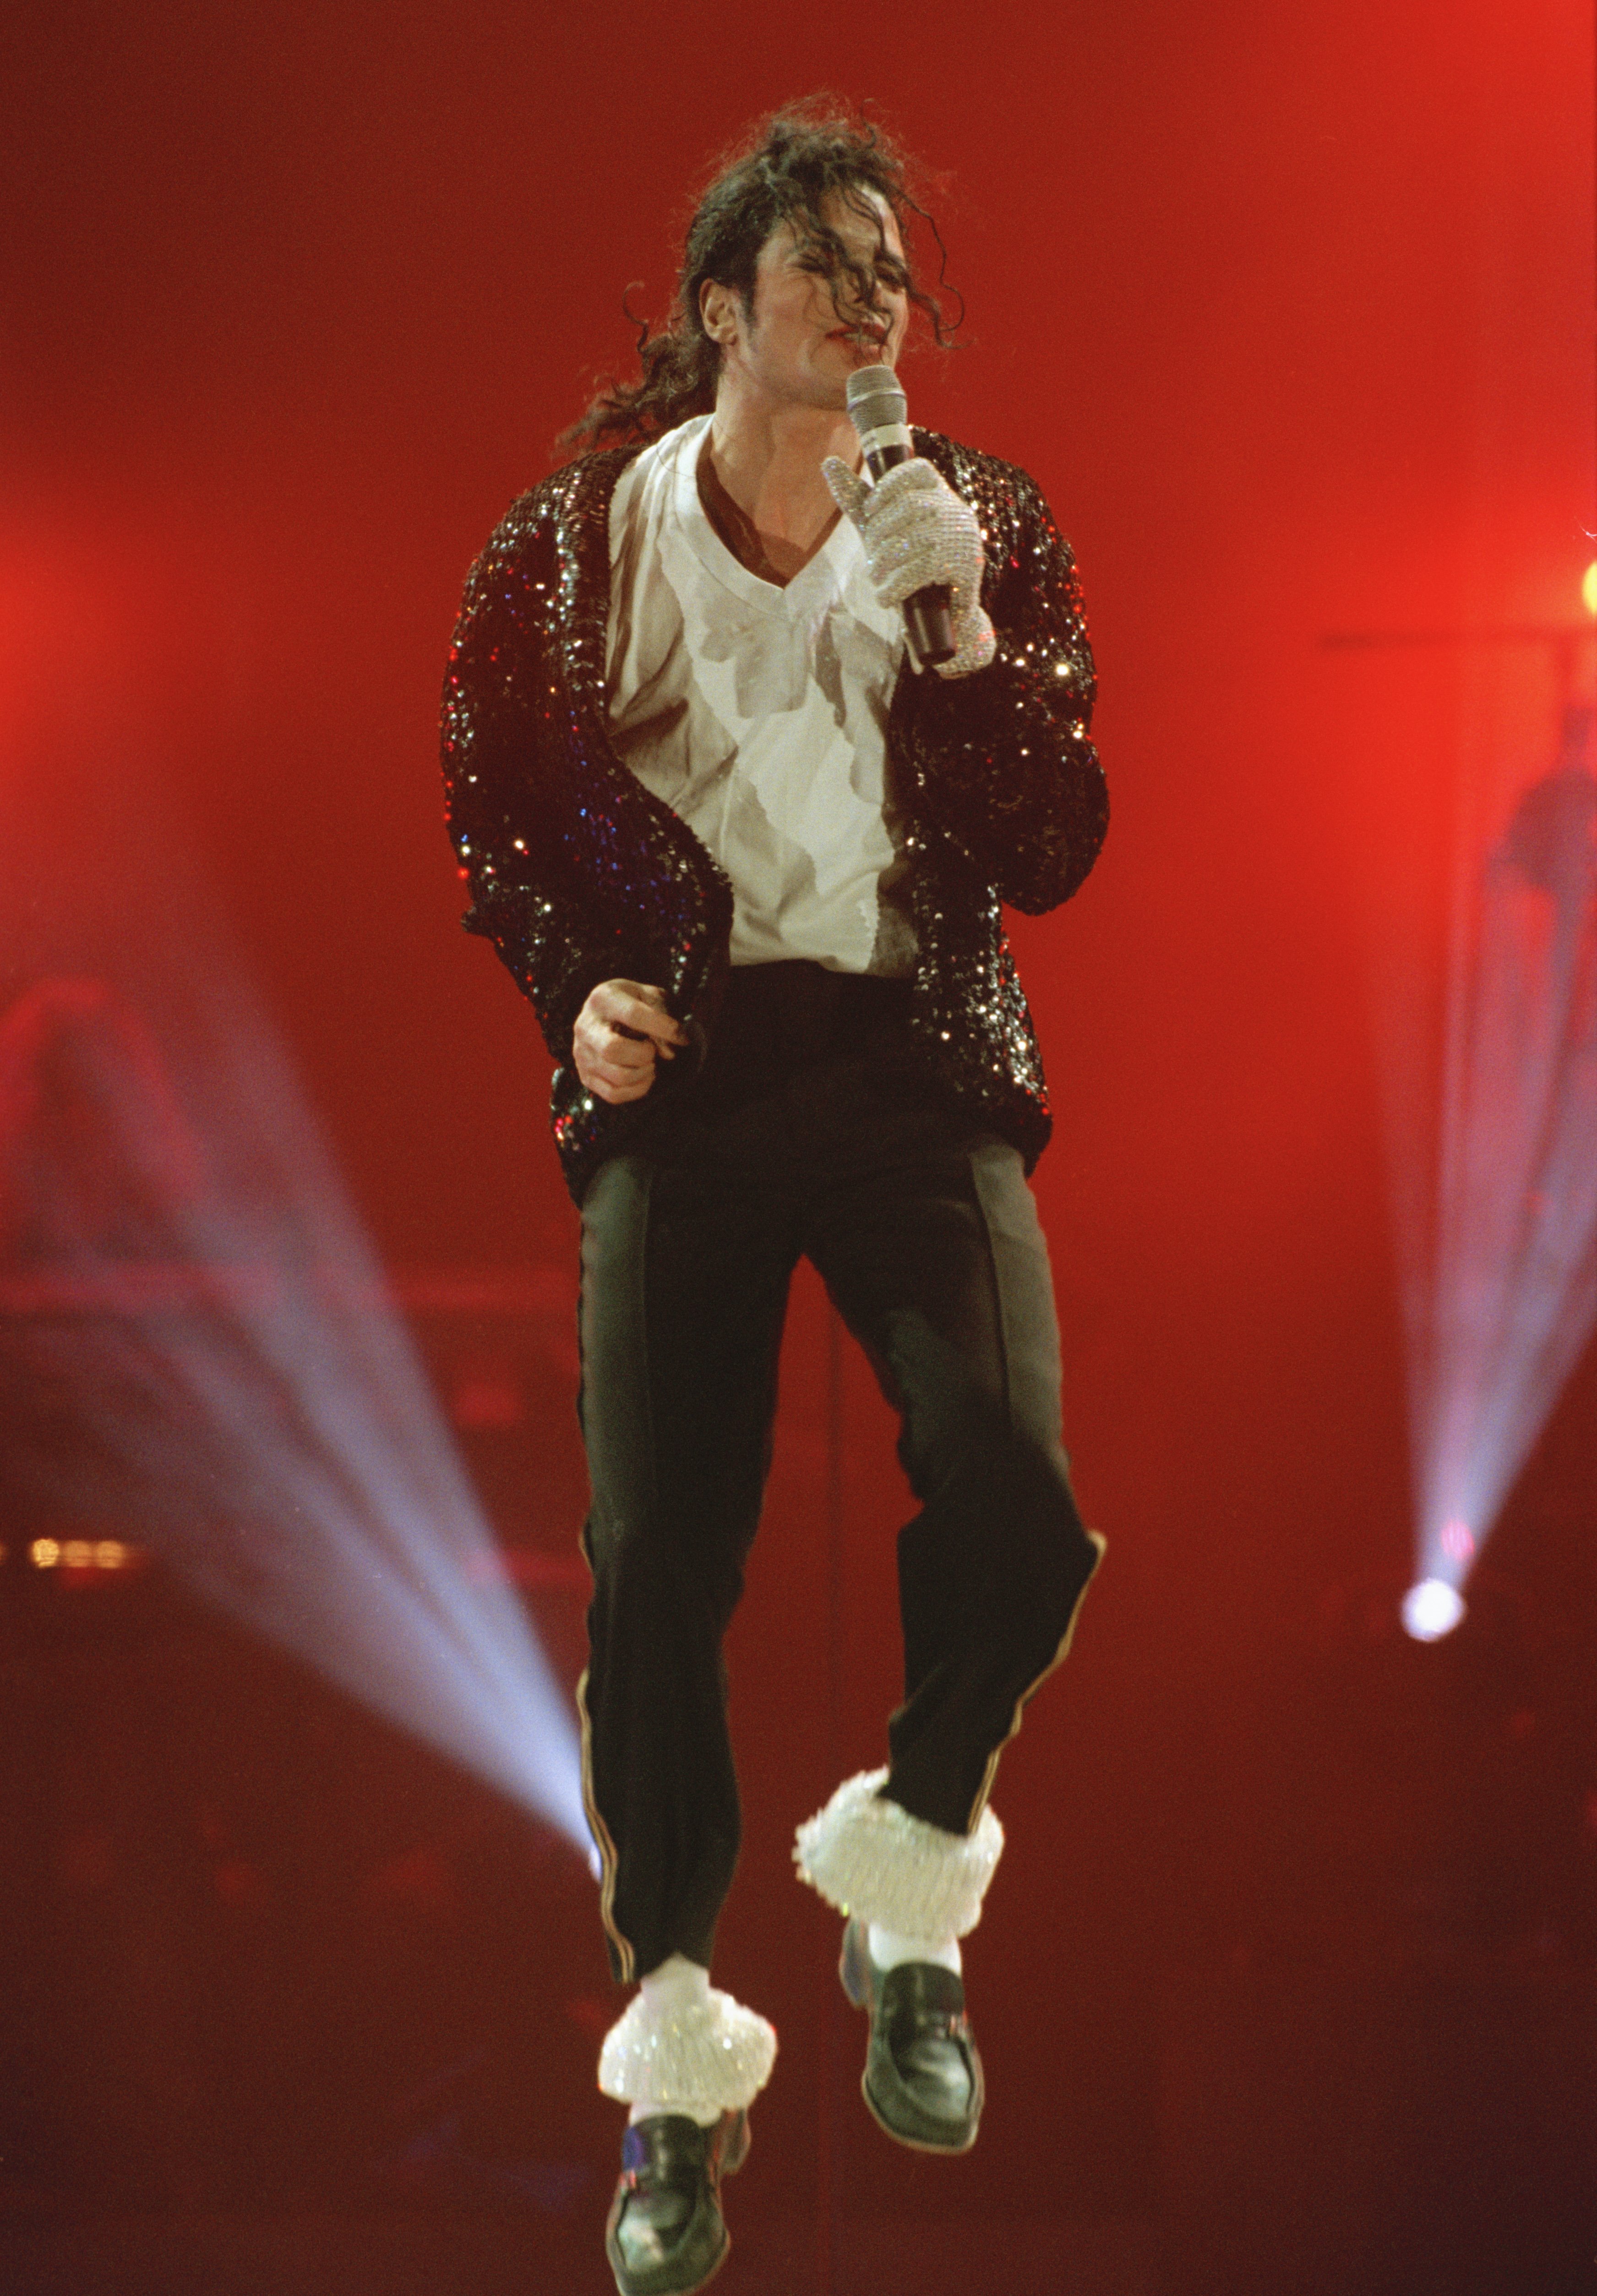 Michael Jackson in concert in Bremen during the HIStory World Tour, 1997. | Source: Getty Images